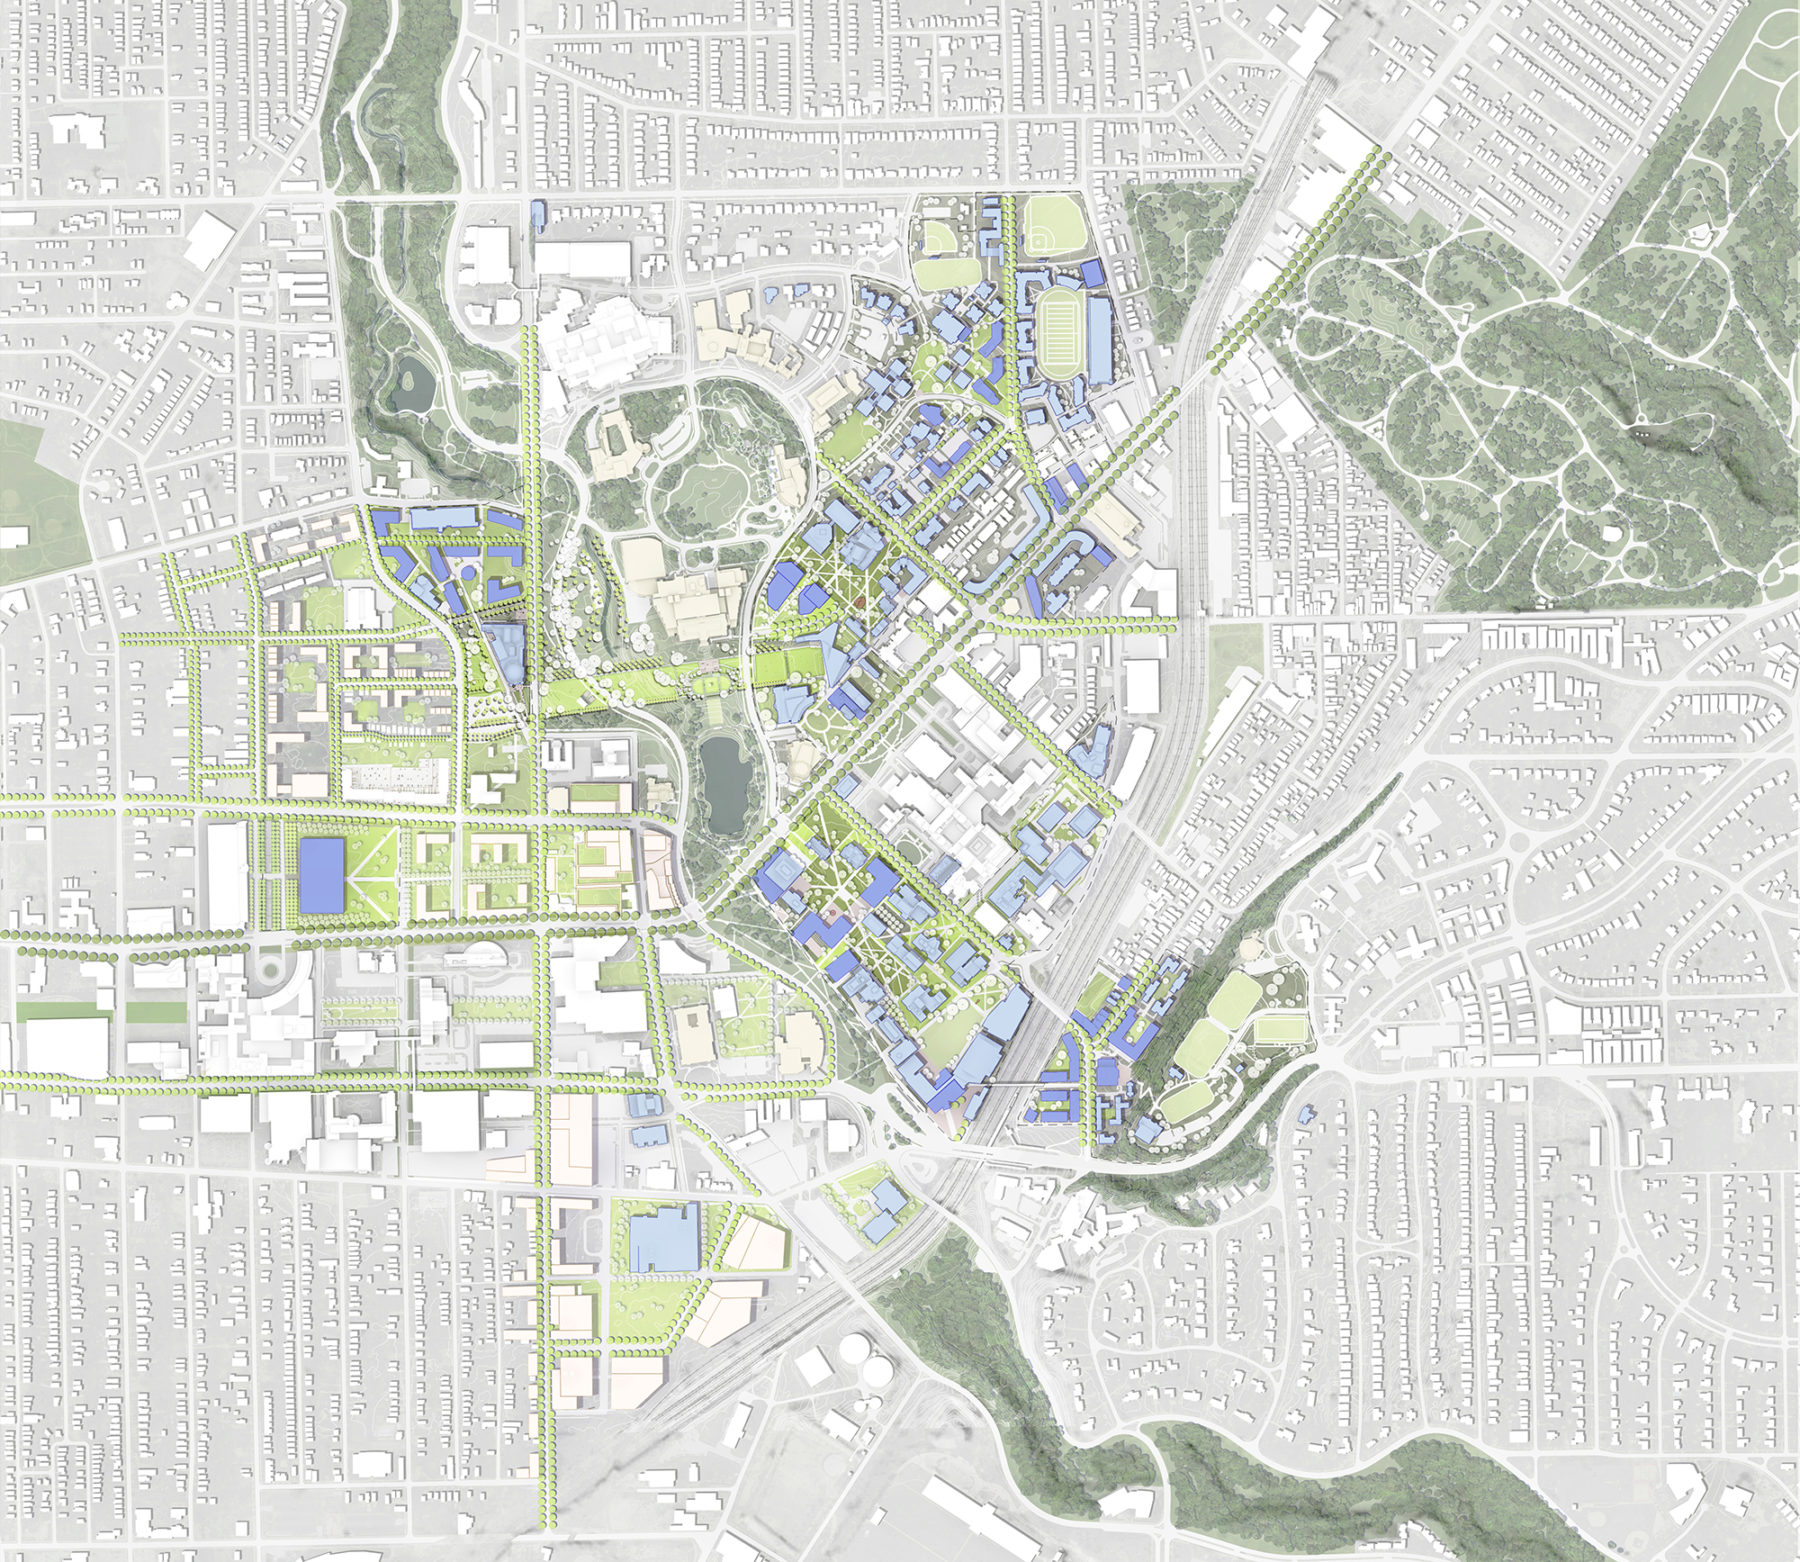 Illustrative plan drawing of the campus